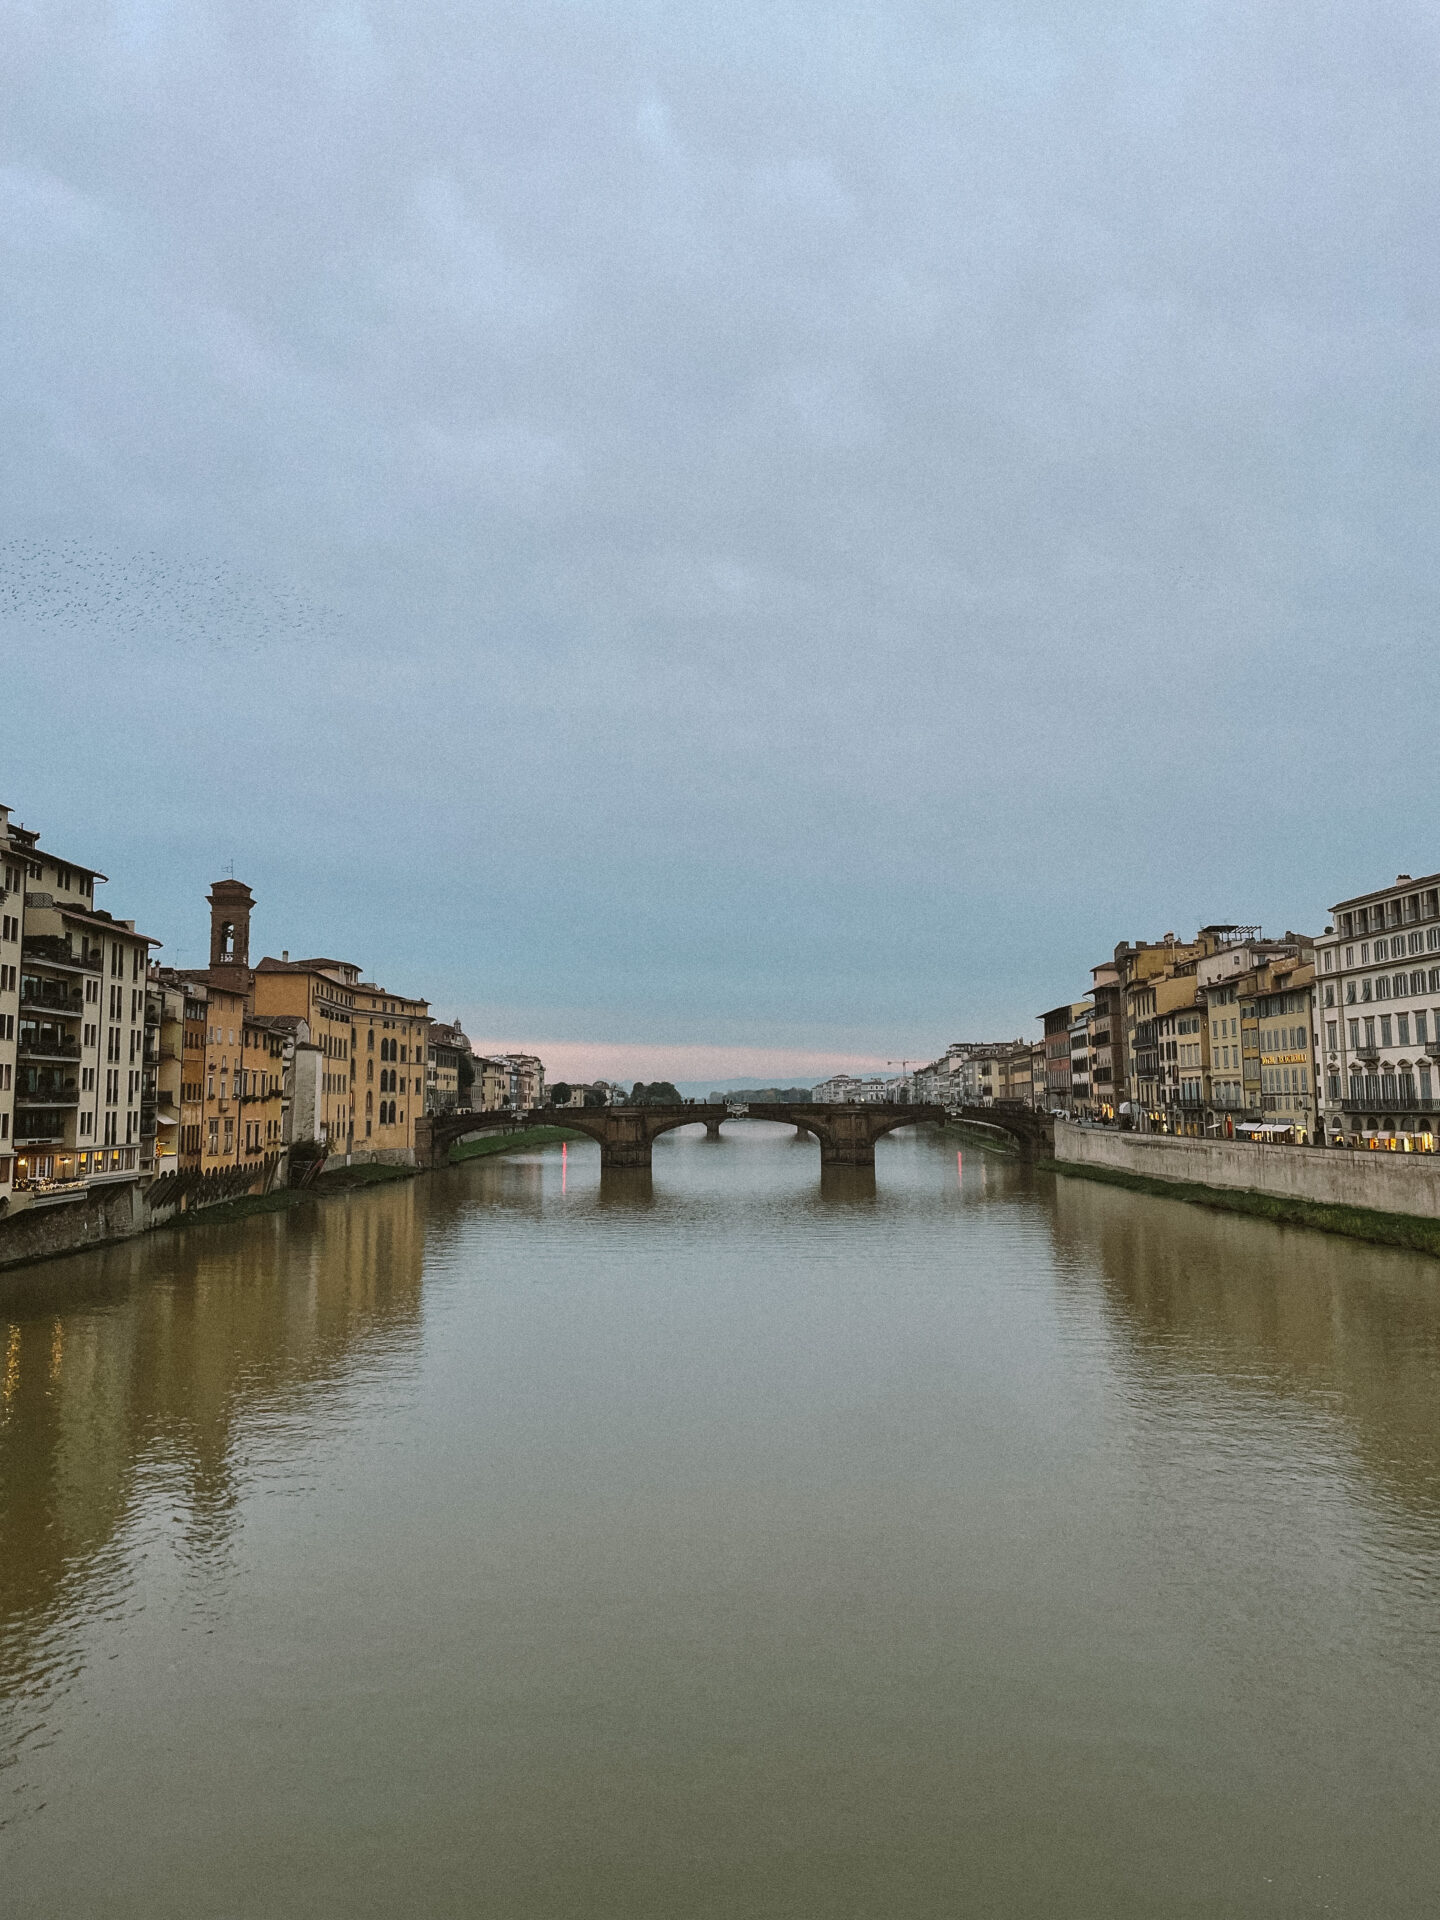 WHAT TO DO IN FLORENCE IN 24 HOURS